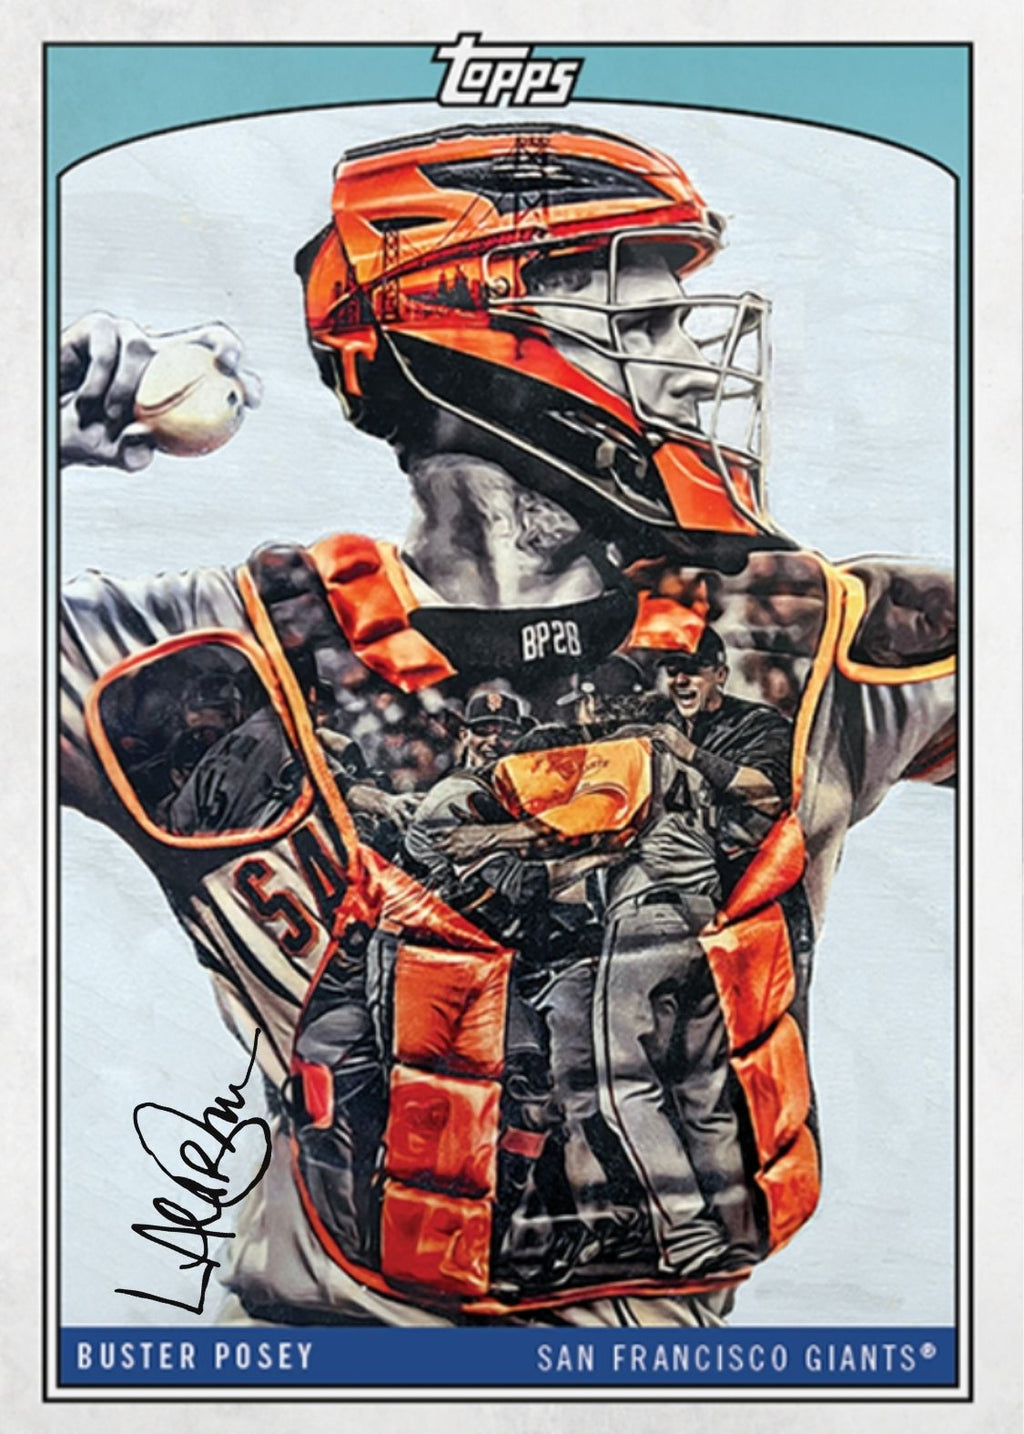 Lauren Taylor x Topps - Artist Autographed Buster Posey Base Card